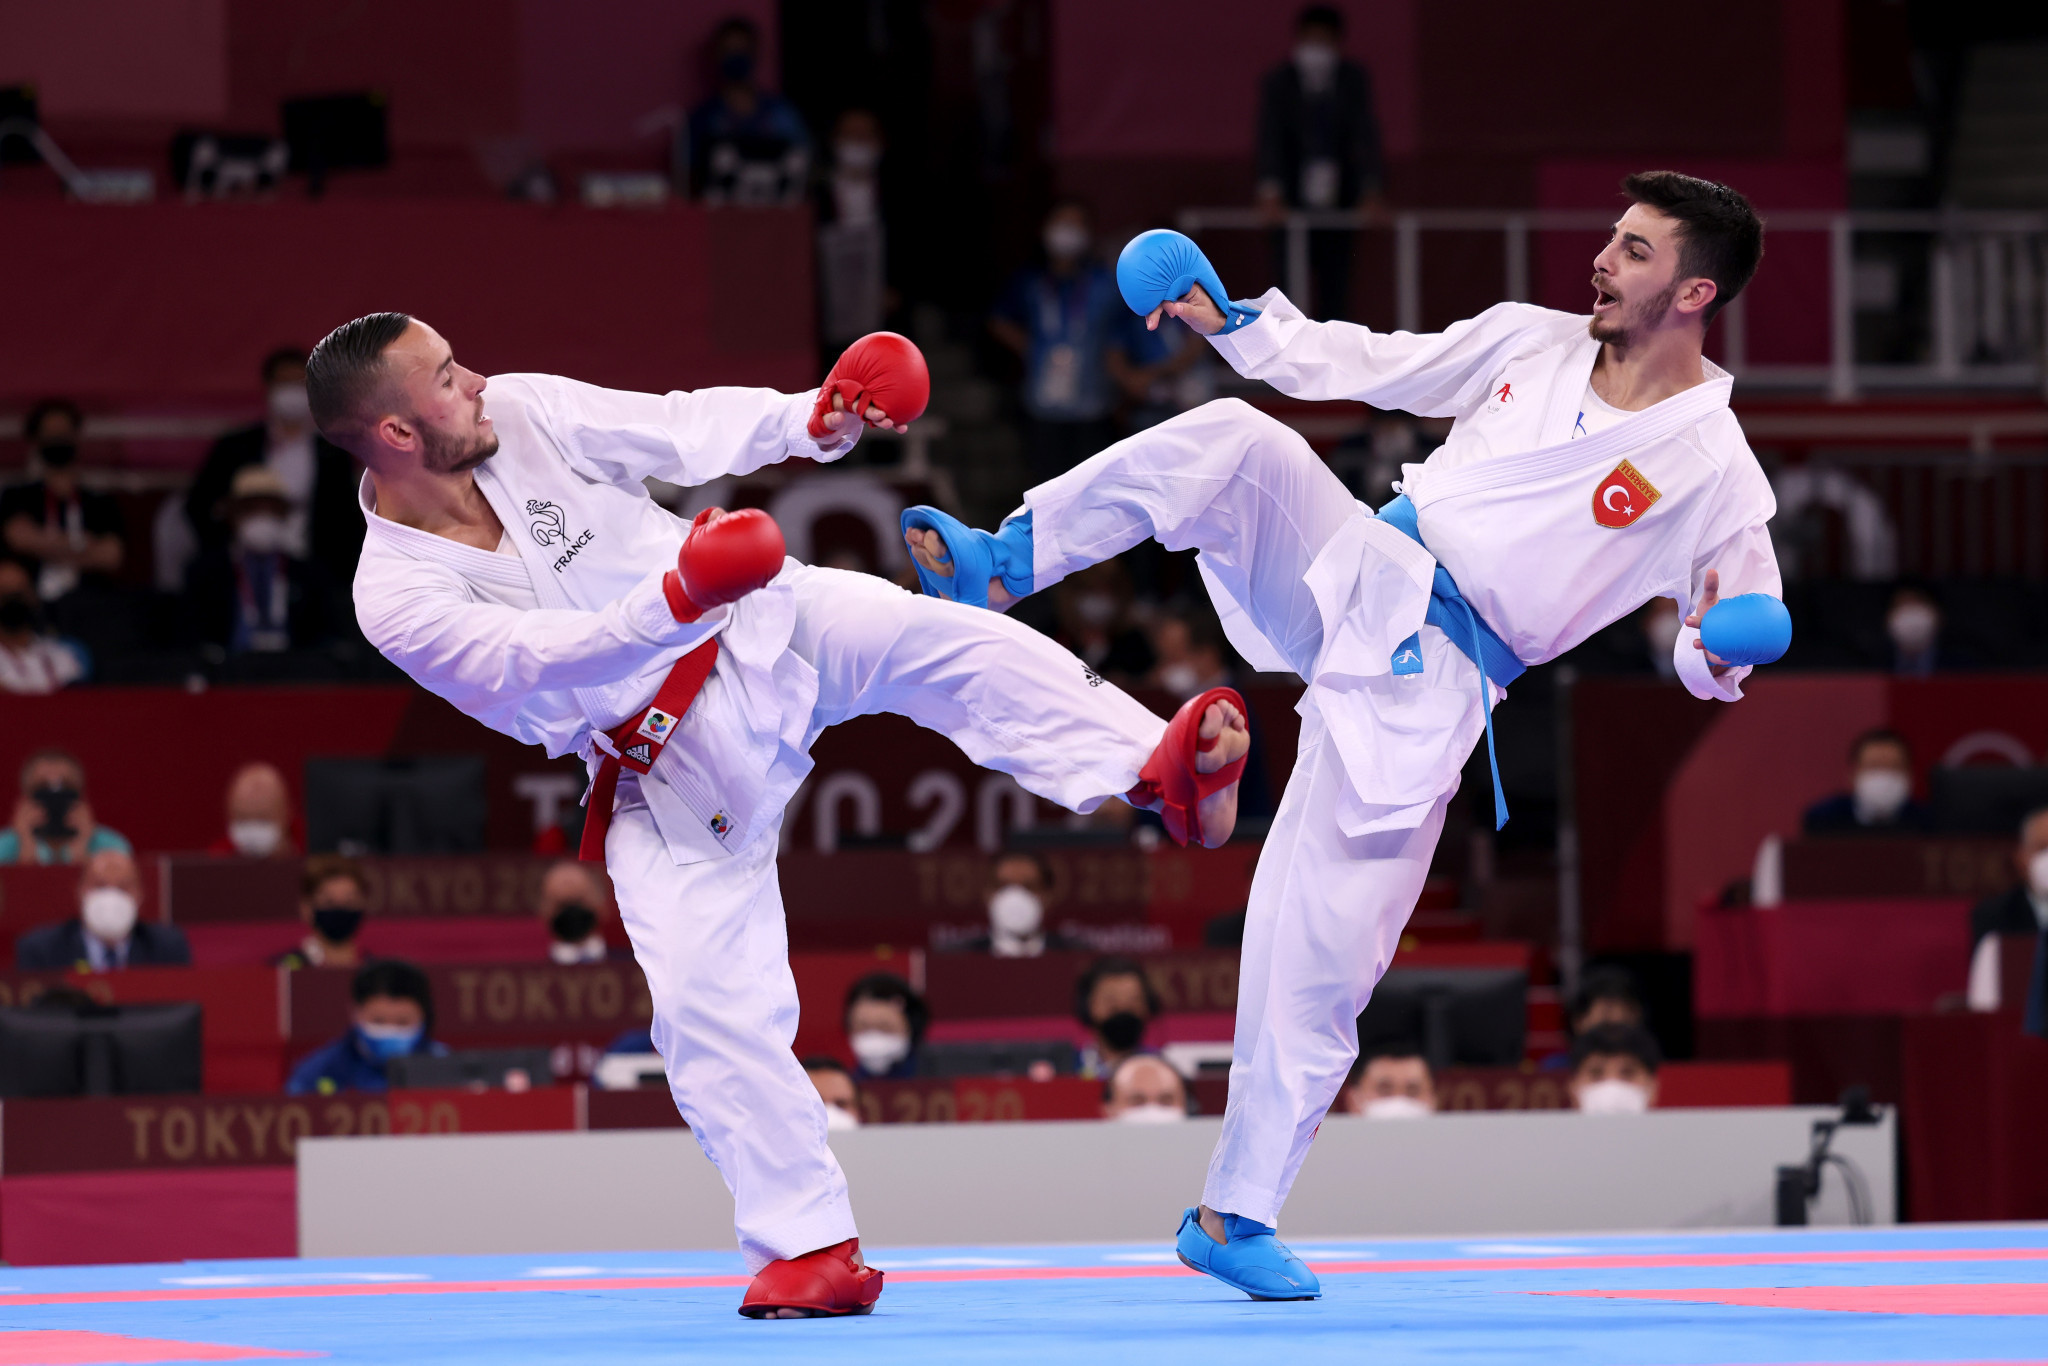 The 2022 edition of the European Karate Championships in Gaziantep, Turkey saw the hosts top the medals table with seven golds ©Getty Images